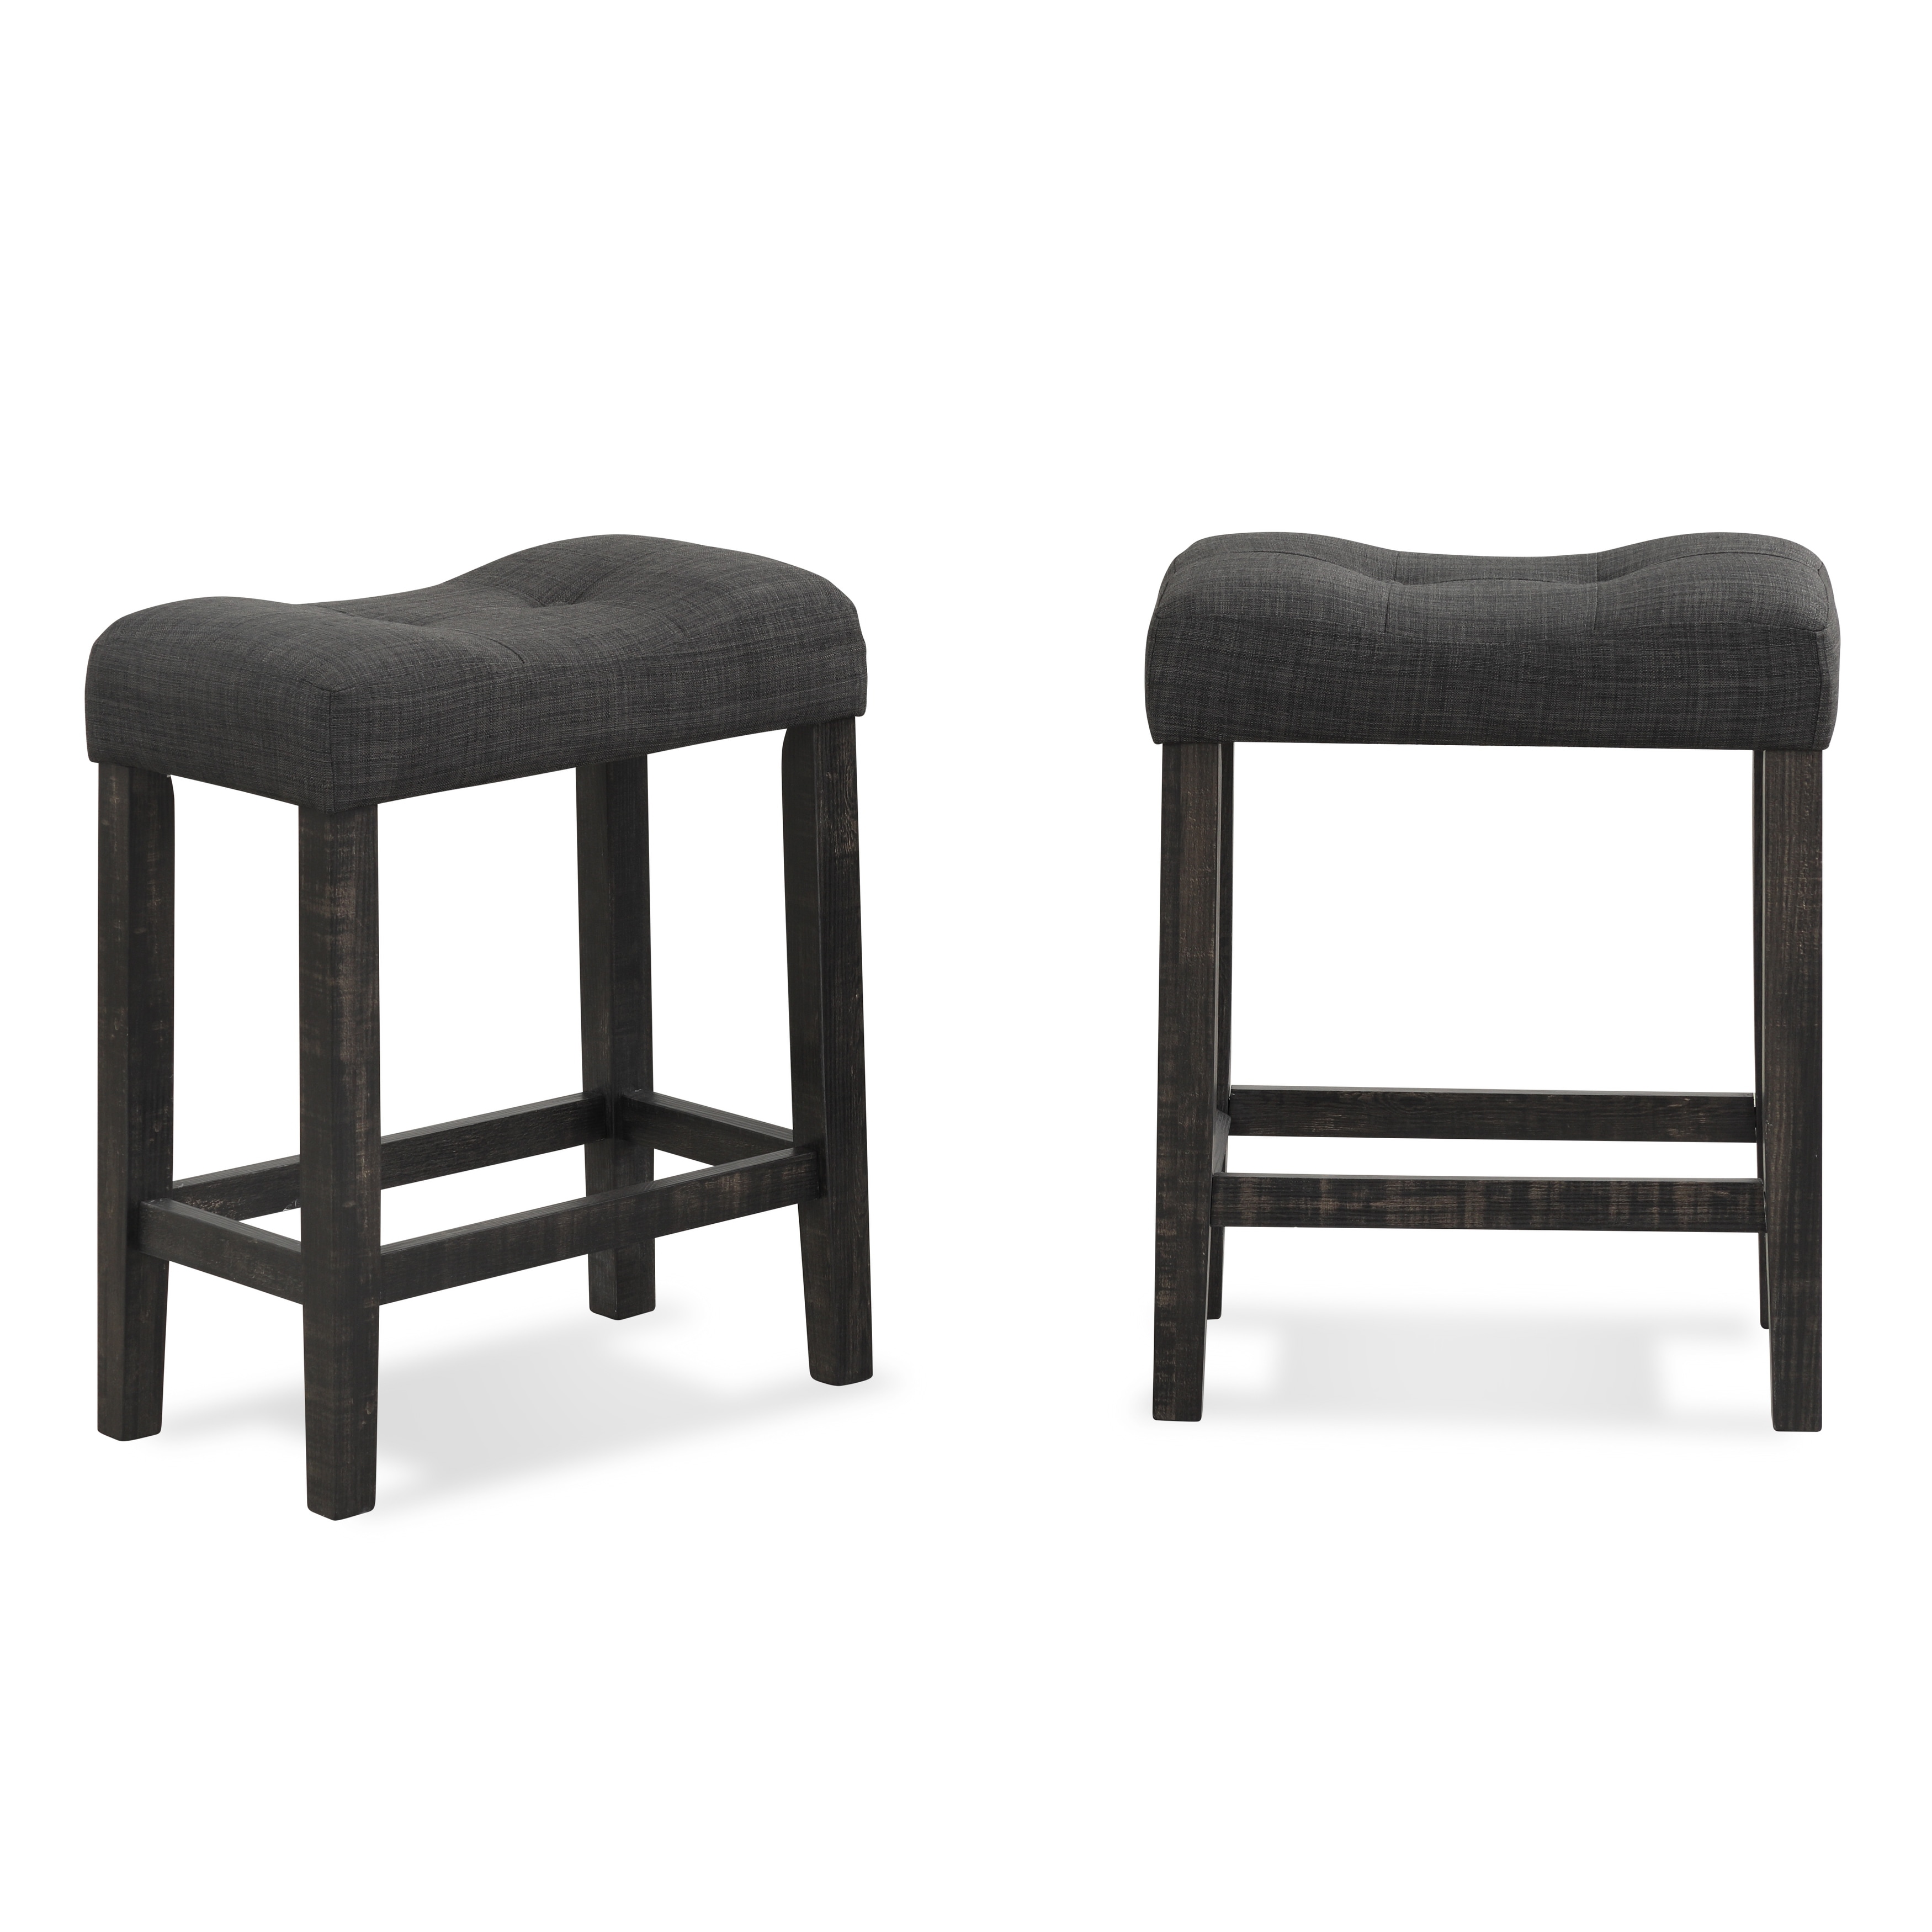 Roundhill Furniture Sora Button Tufted Counter Height Saddle Stool, Set of 2..